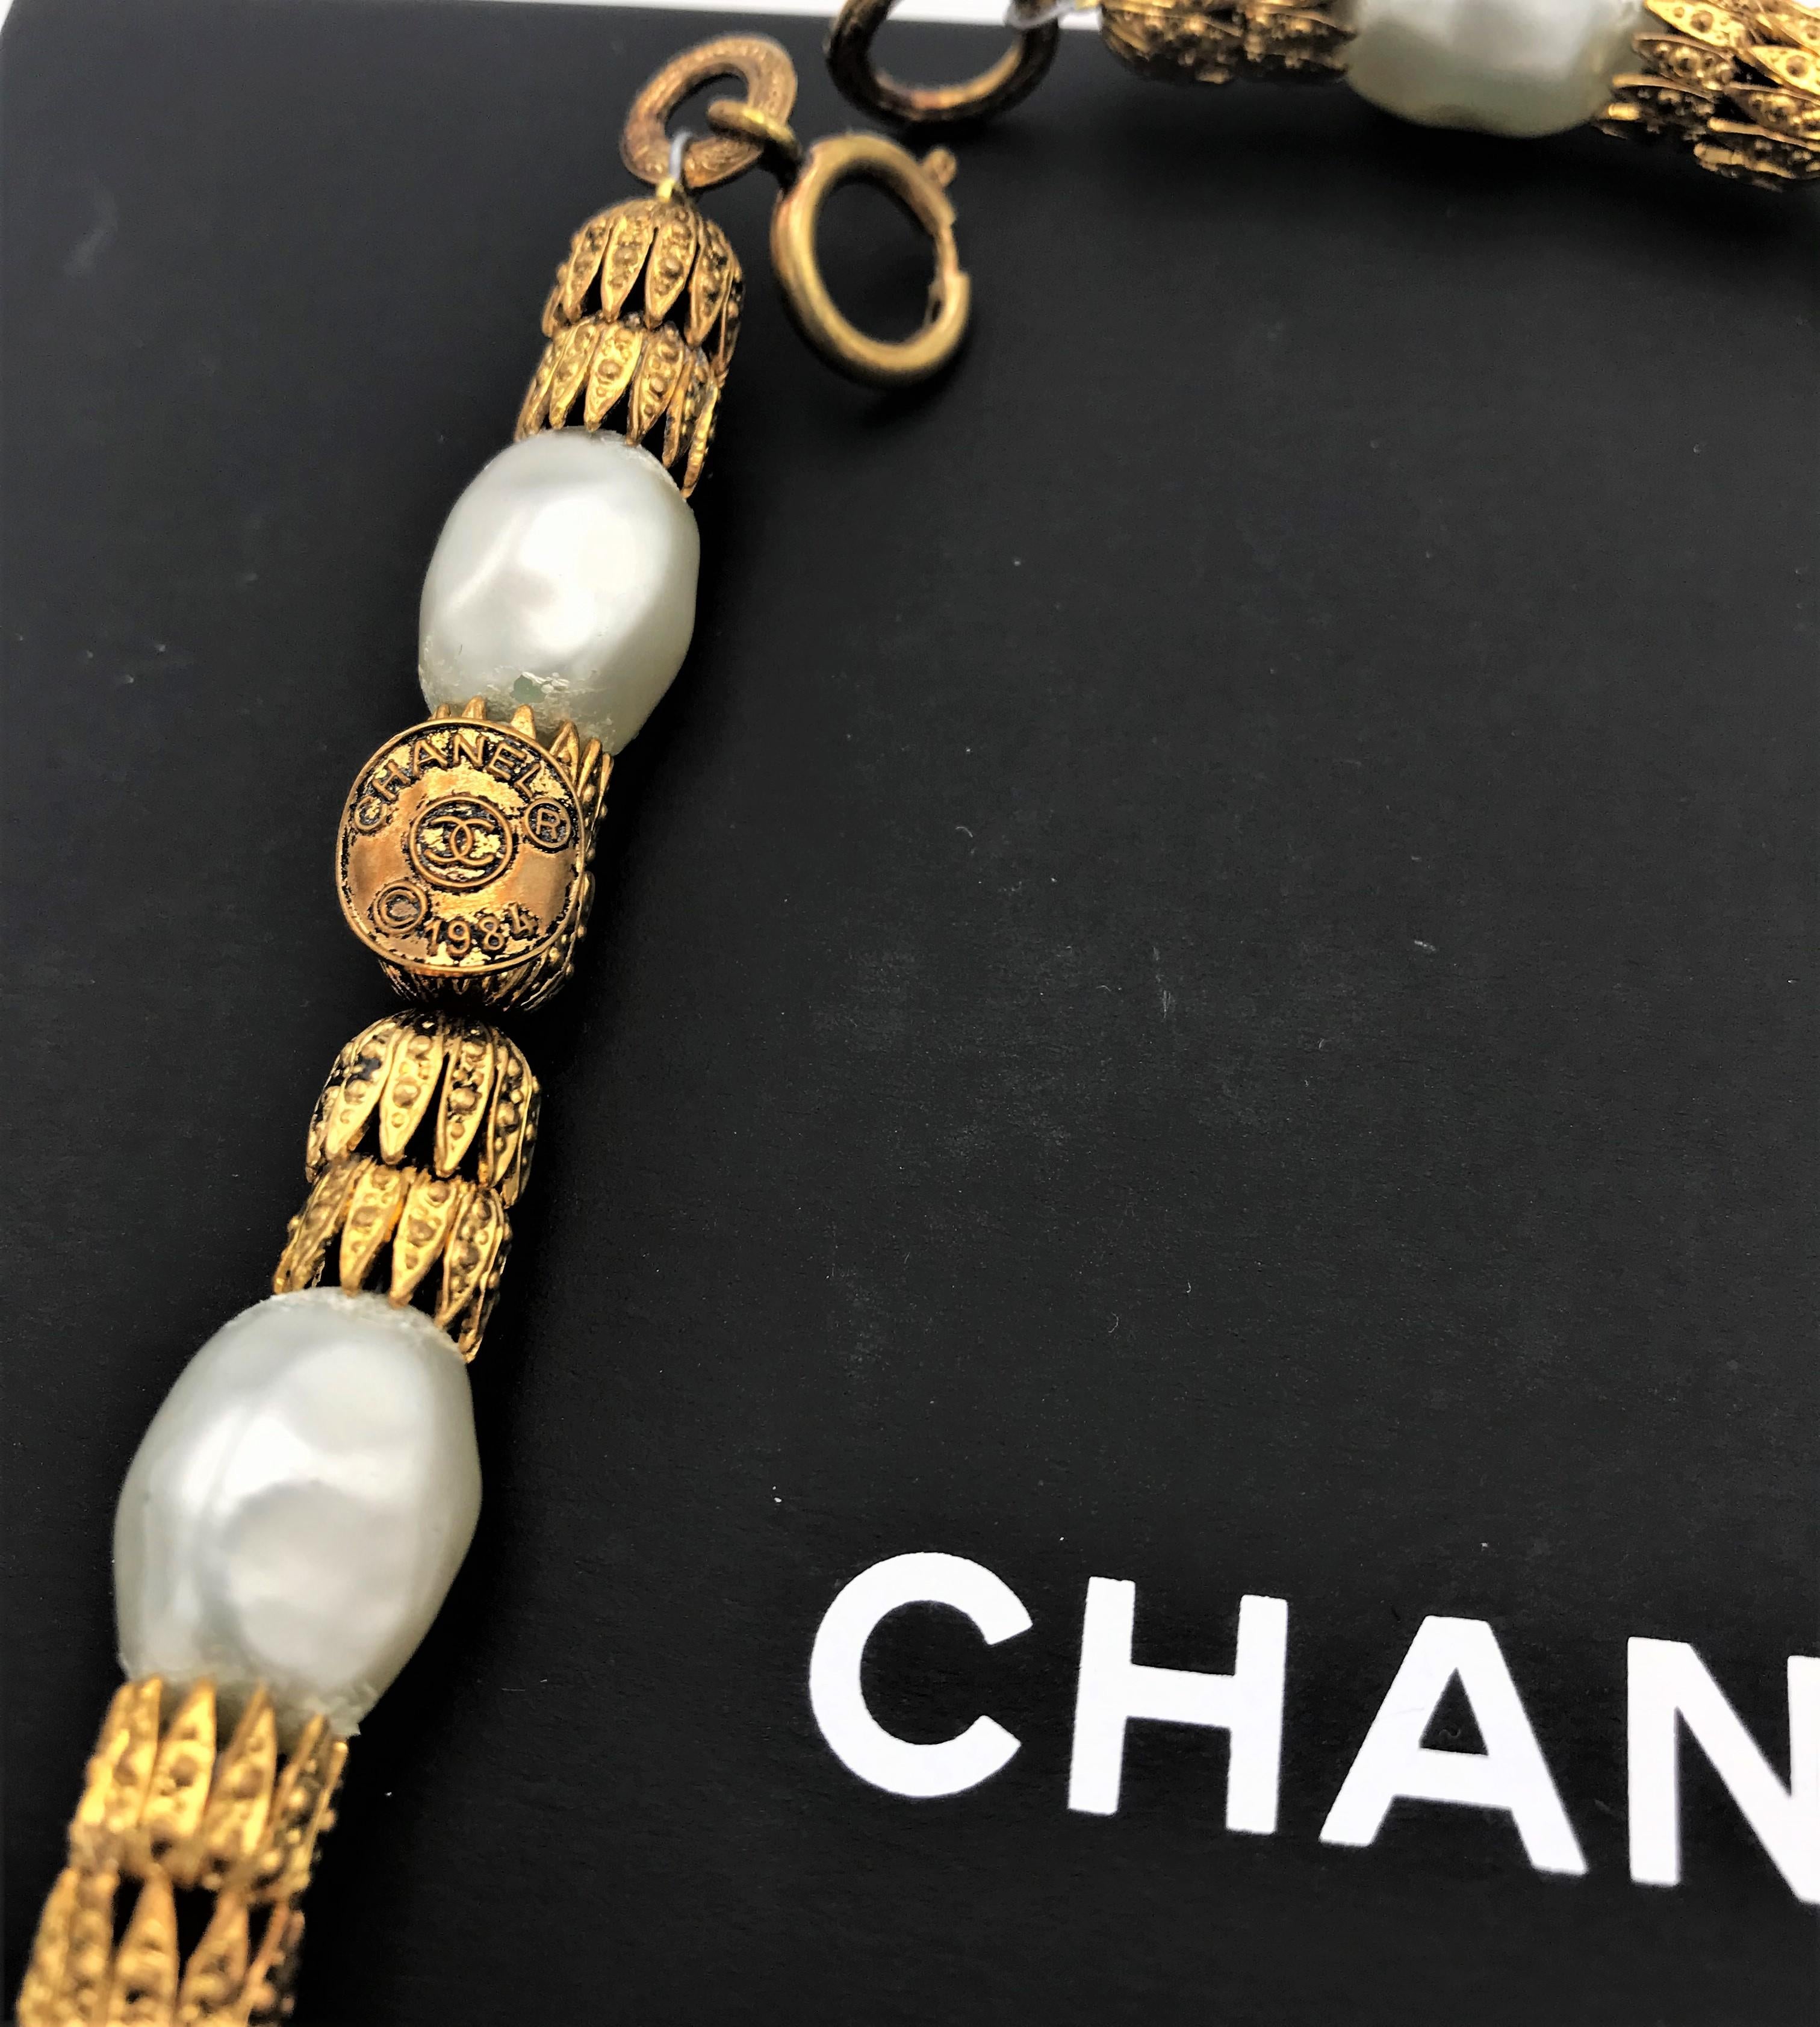 A beautiful and very unique Chanel necklace in Byzantine style, consisting of large faux baroque pearls framed in different chased elements as shown in the book by Patrick Mauries.
Measurement: Length 52 cm, faux pearls around 1 cm to 1.5 cm, middle